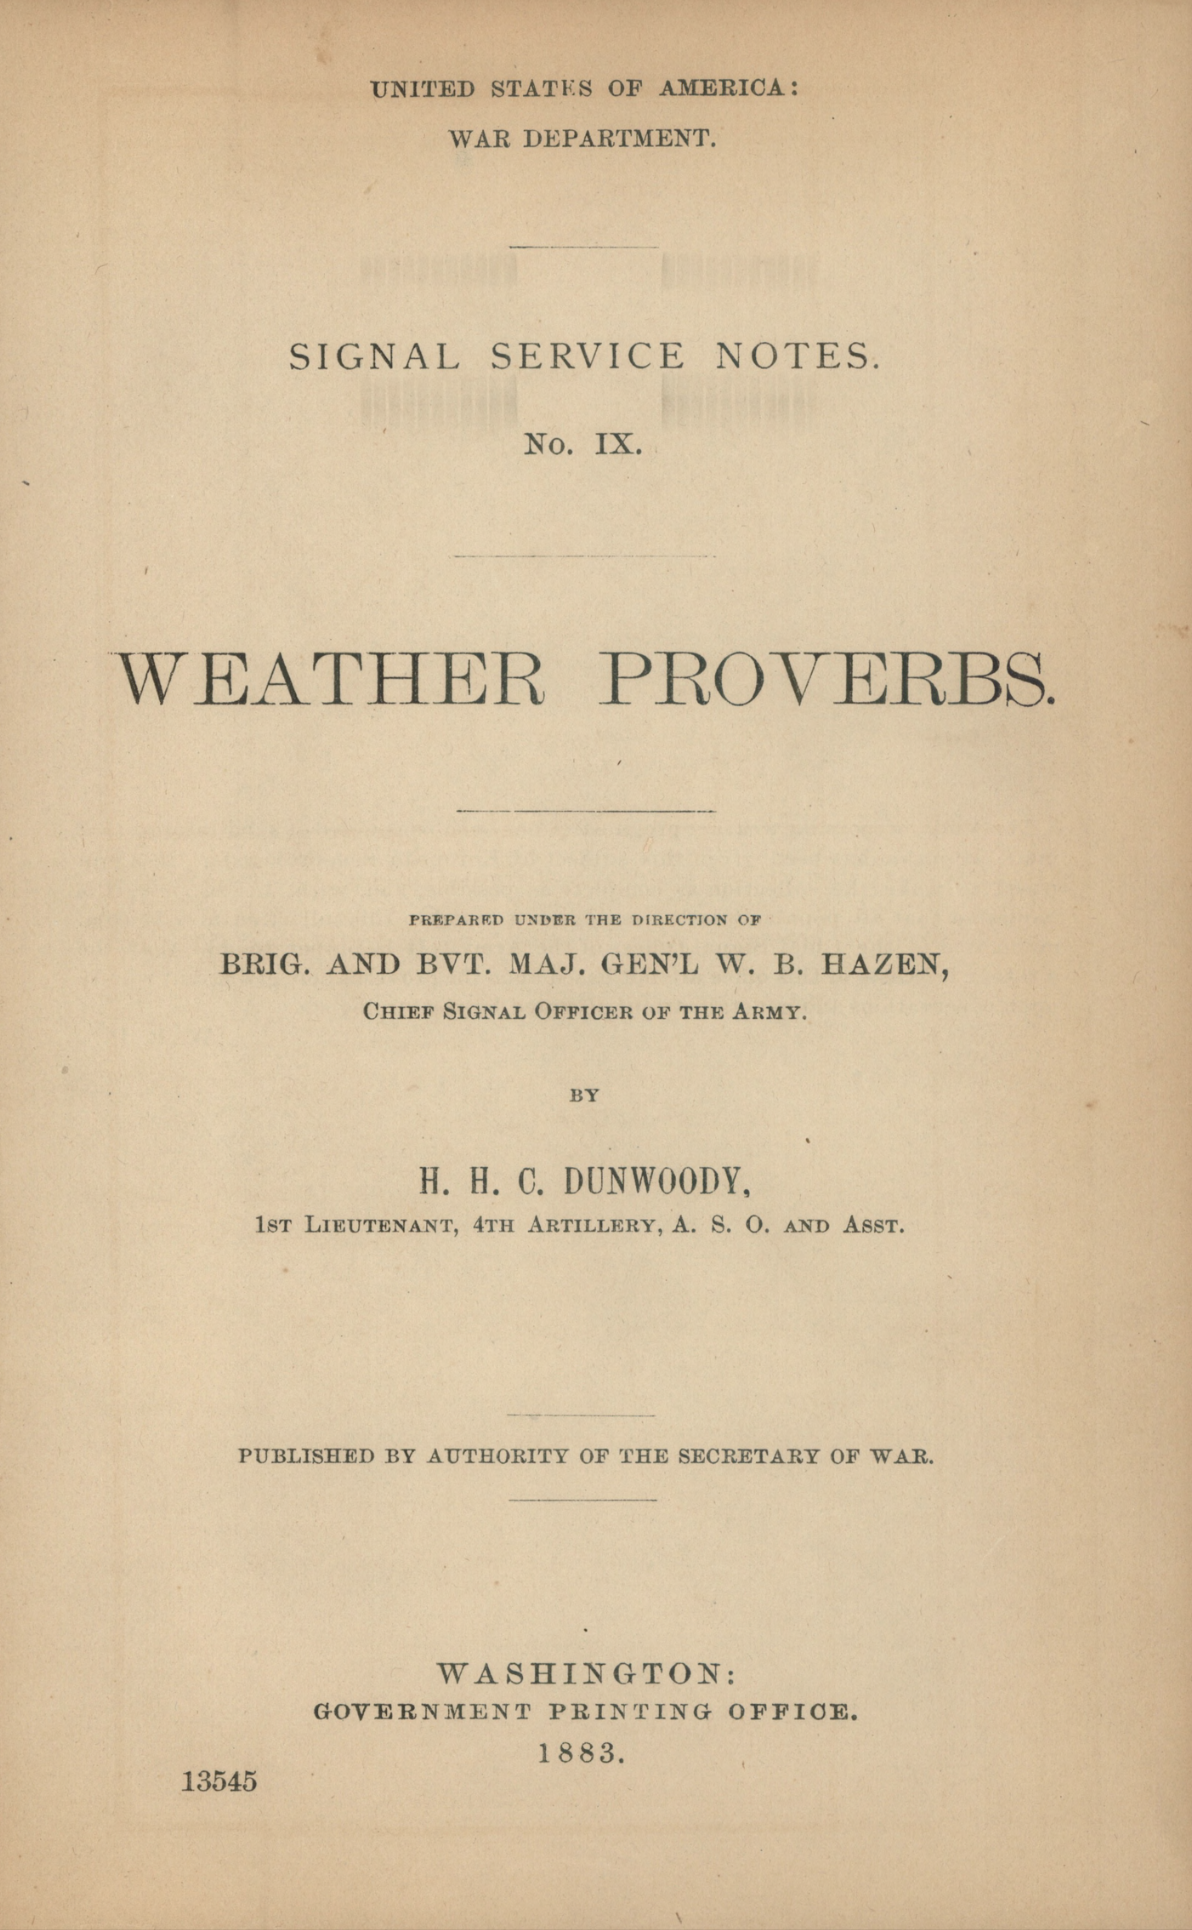 A scan of the front page of the publication Weather Proverbs from 1883 by the United States of America War Department.